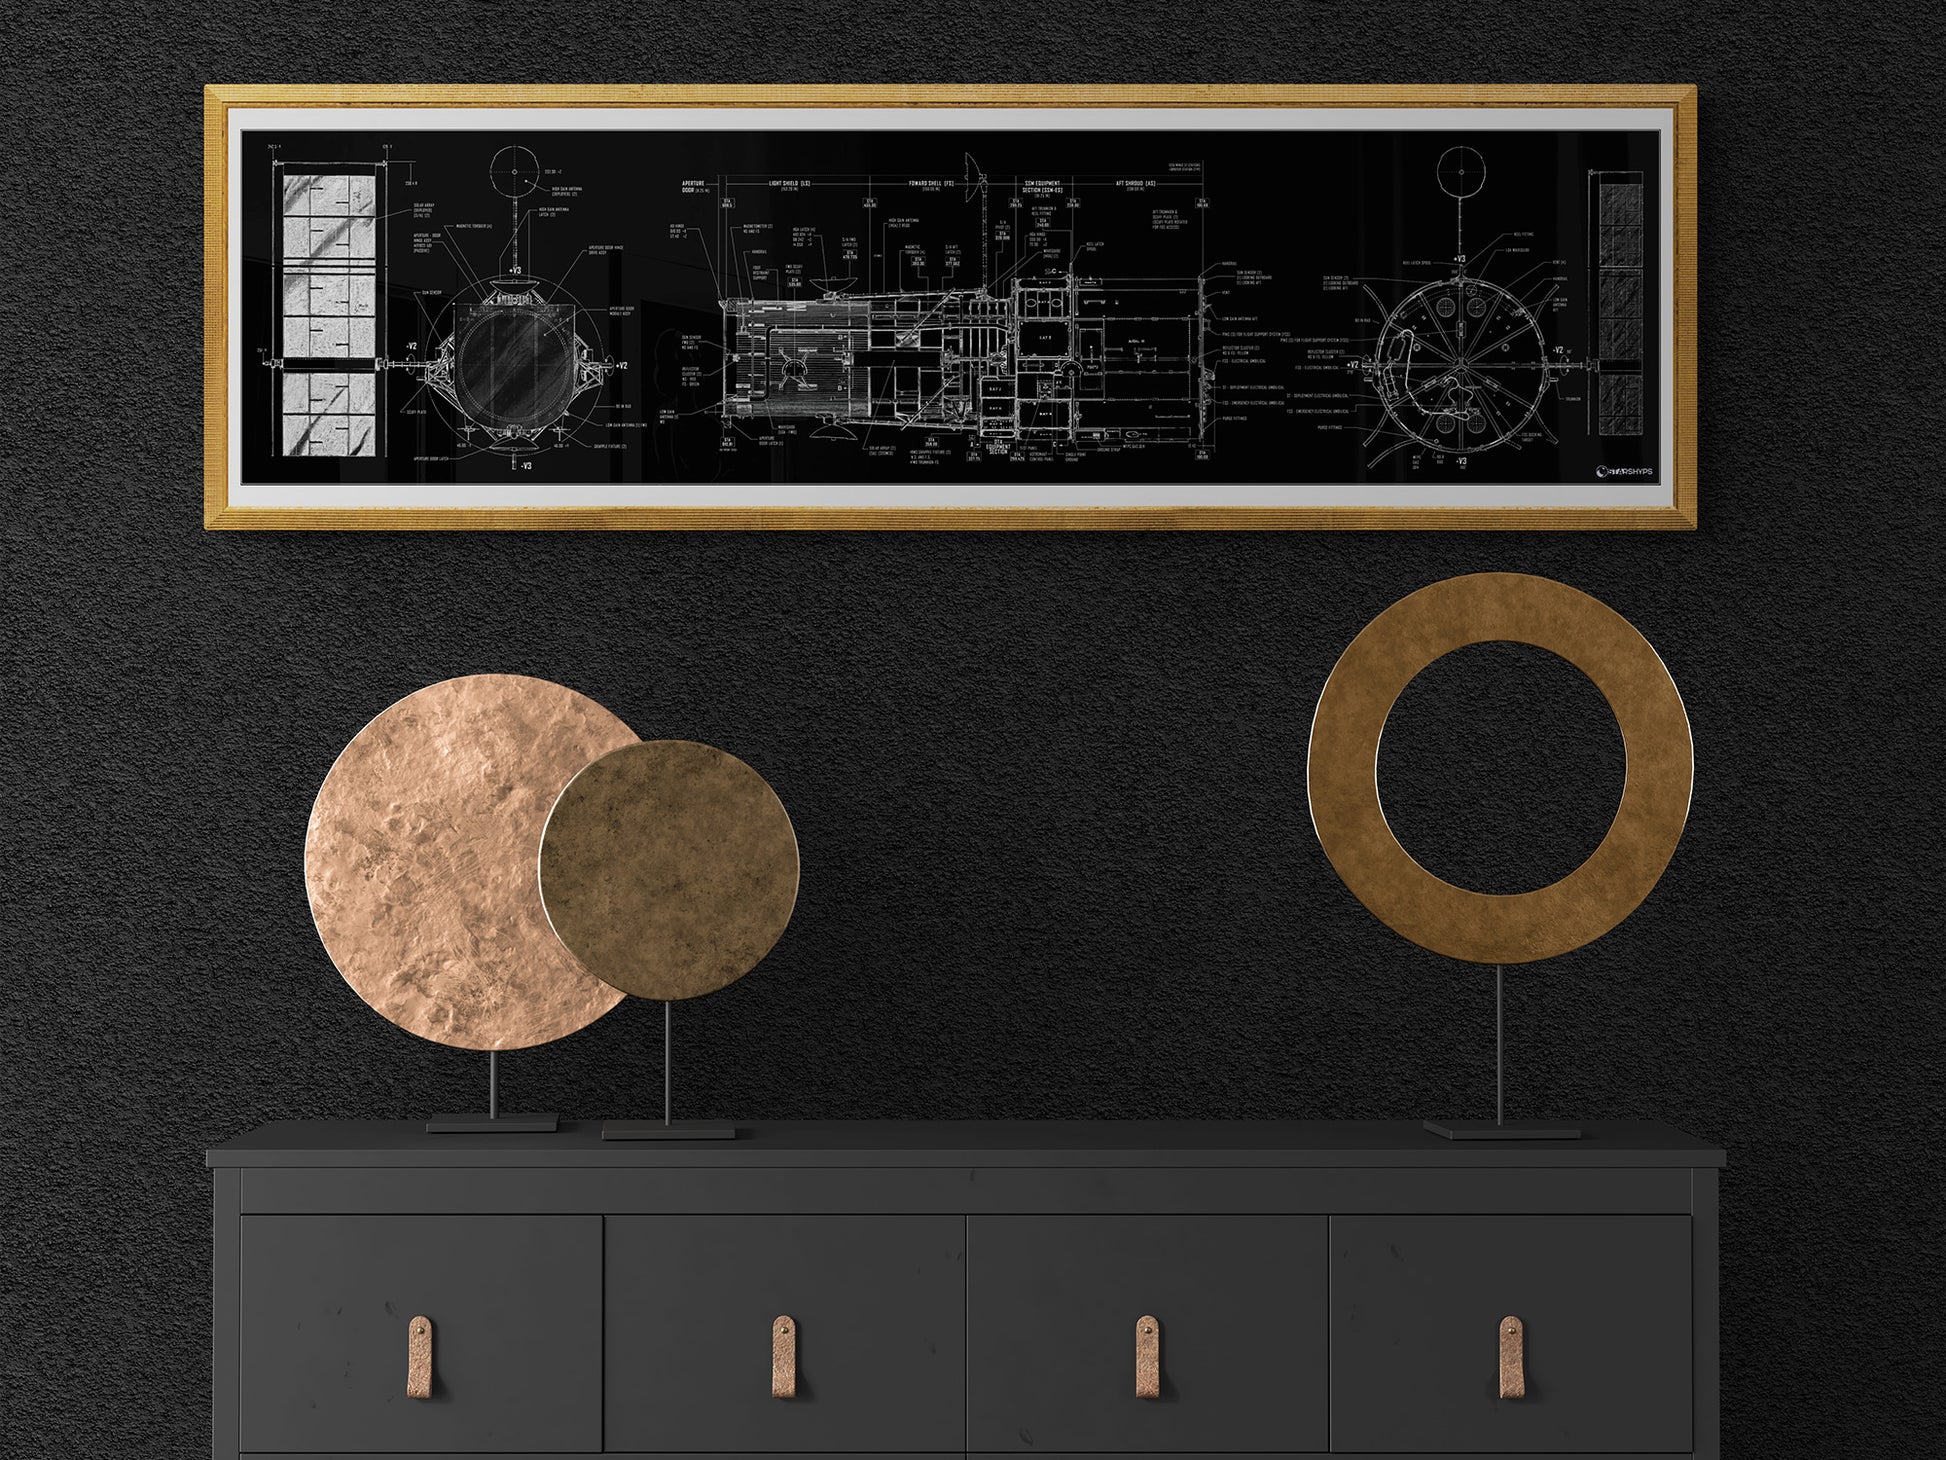 Hubble Space Telescope Blueprint | Rocket Blueprint Posters | A technical blueprint of the Hubble Space Telescope, encased in a gold frame, is showcased on a black wall above a minimalist black dresser. The dresser features two circular decorative pieces in gold and copper.